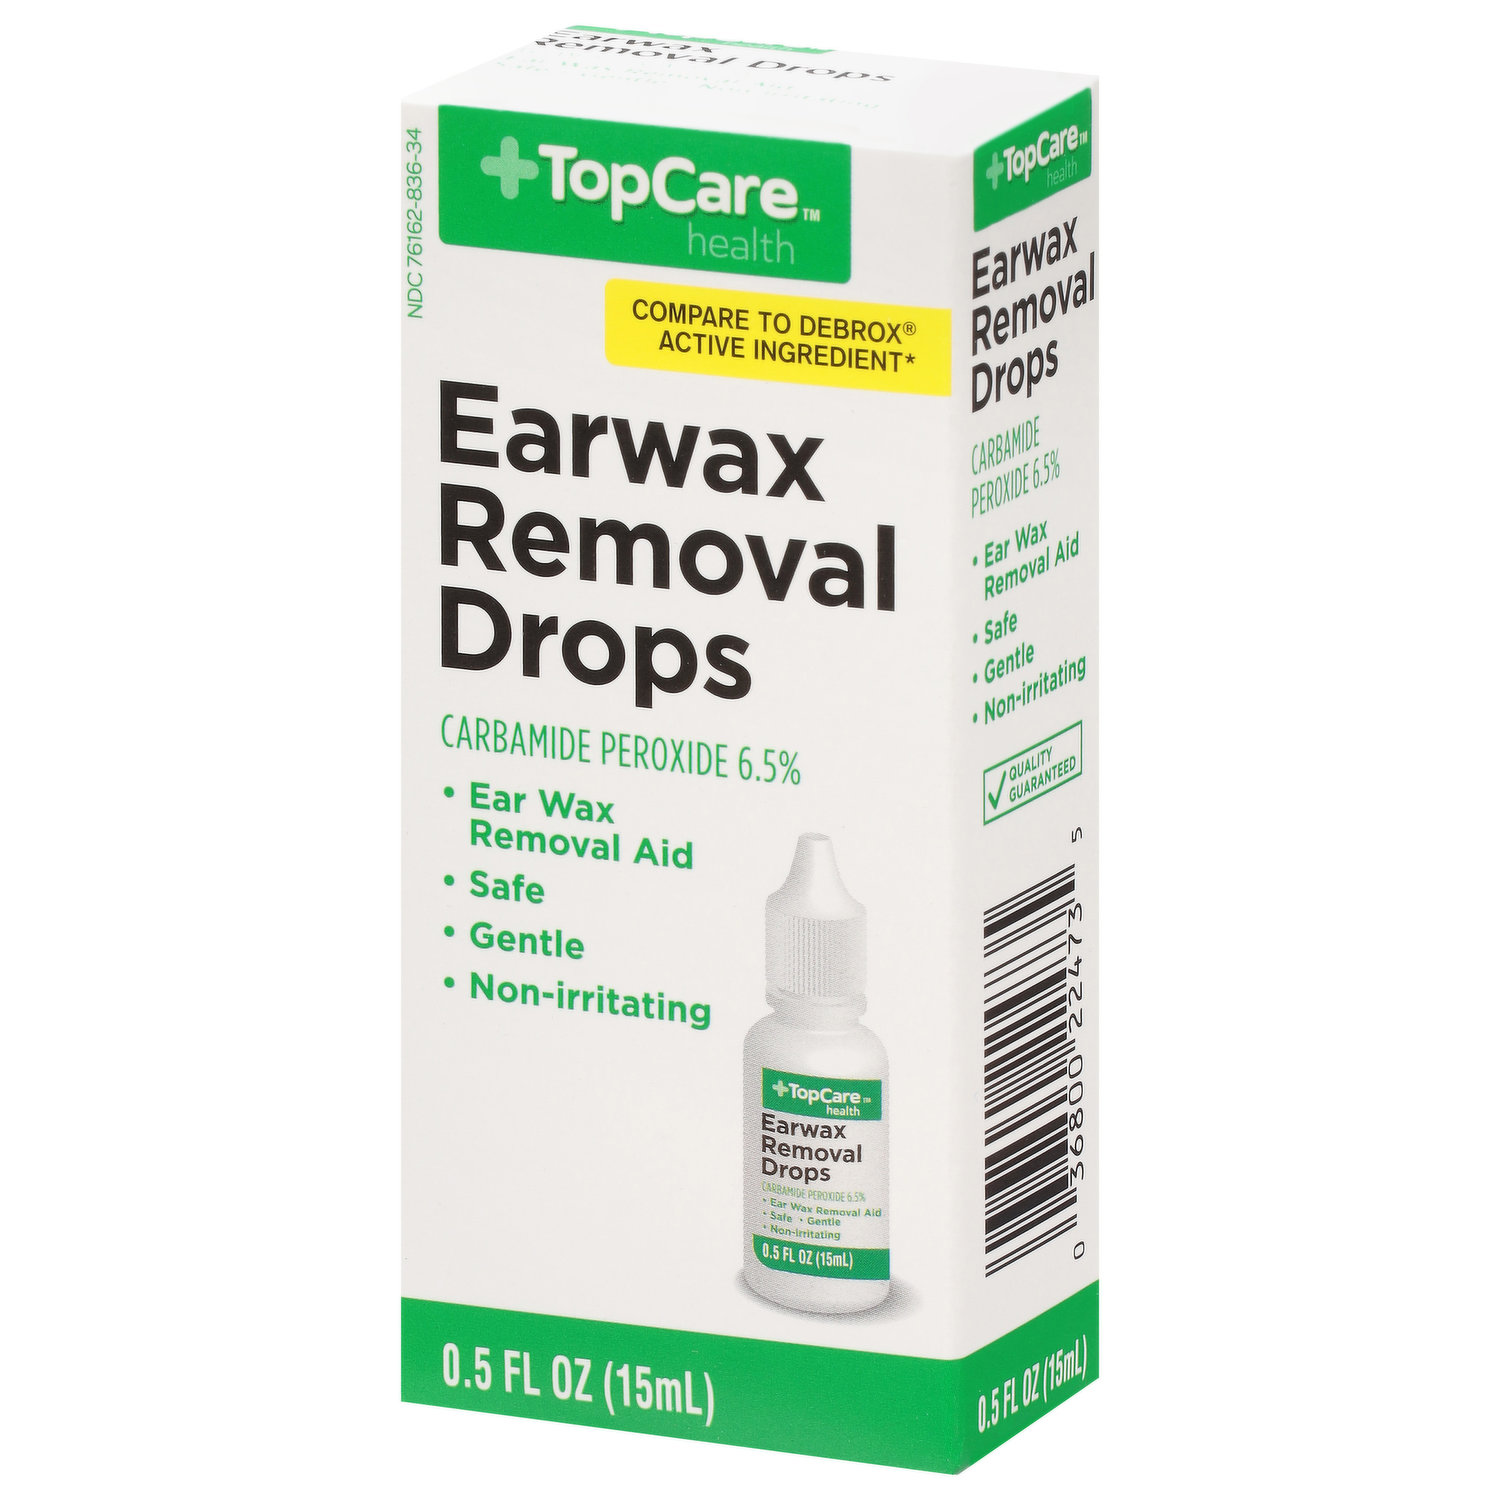 TopCare Earwax Removal Drops